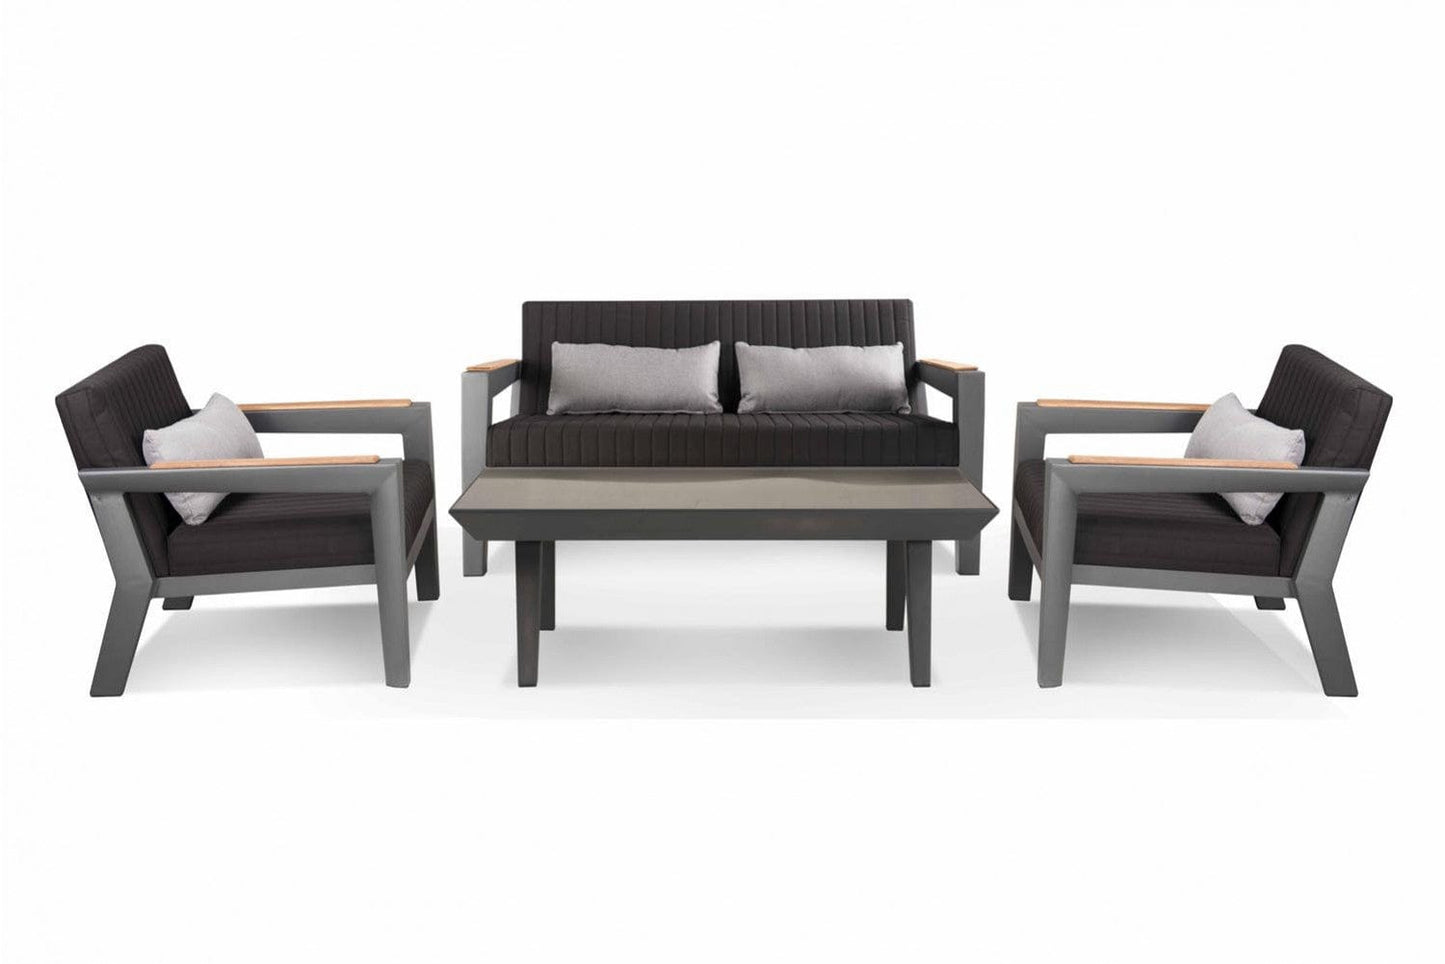 Dreamline Outdoor Furniture - Sofa Set (2 Seater , 2 Single Seater And 1 Center Table Set)